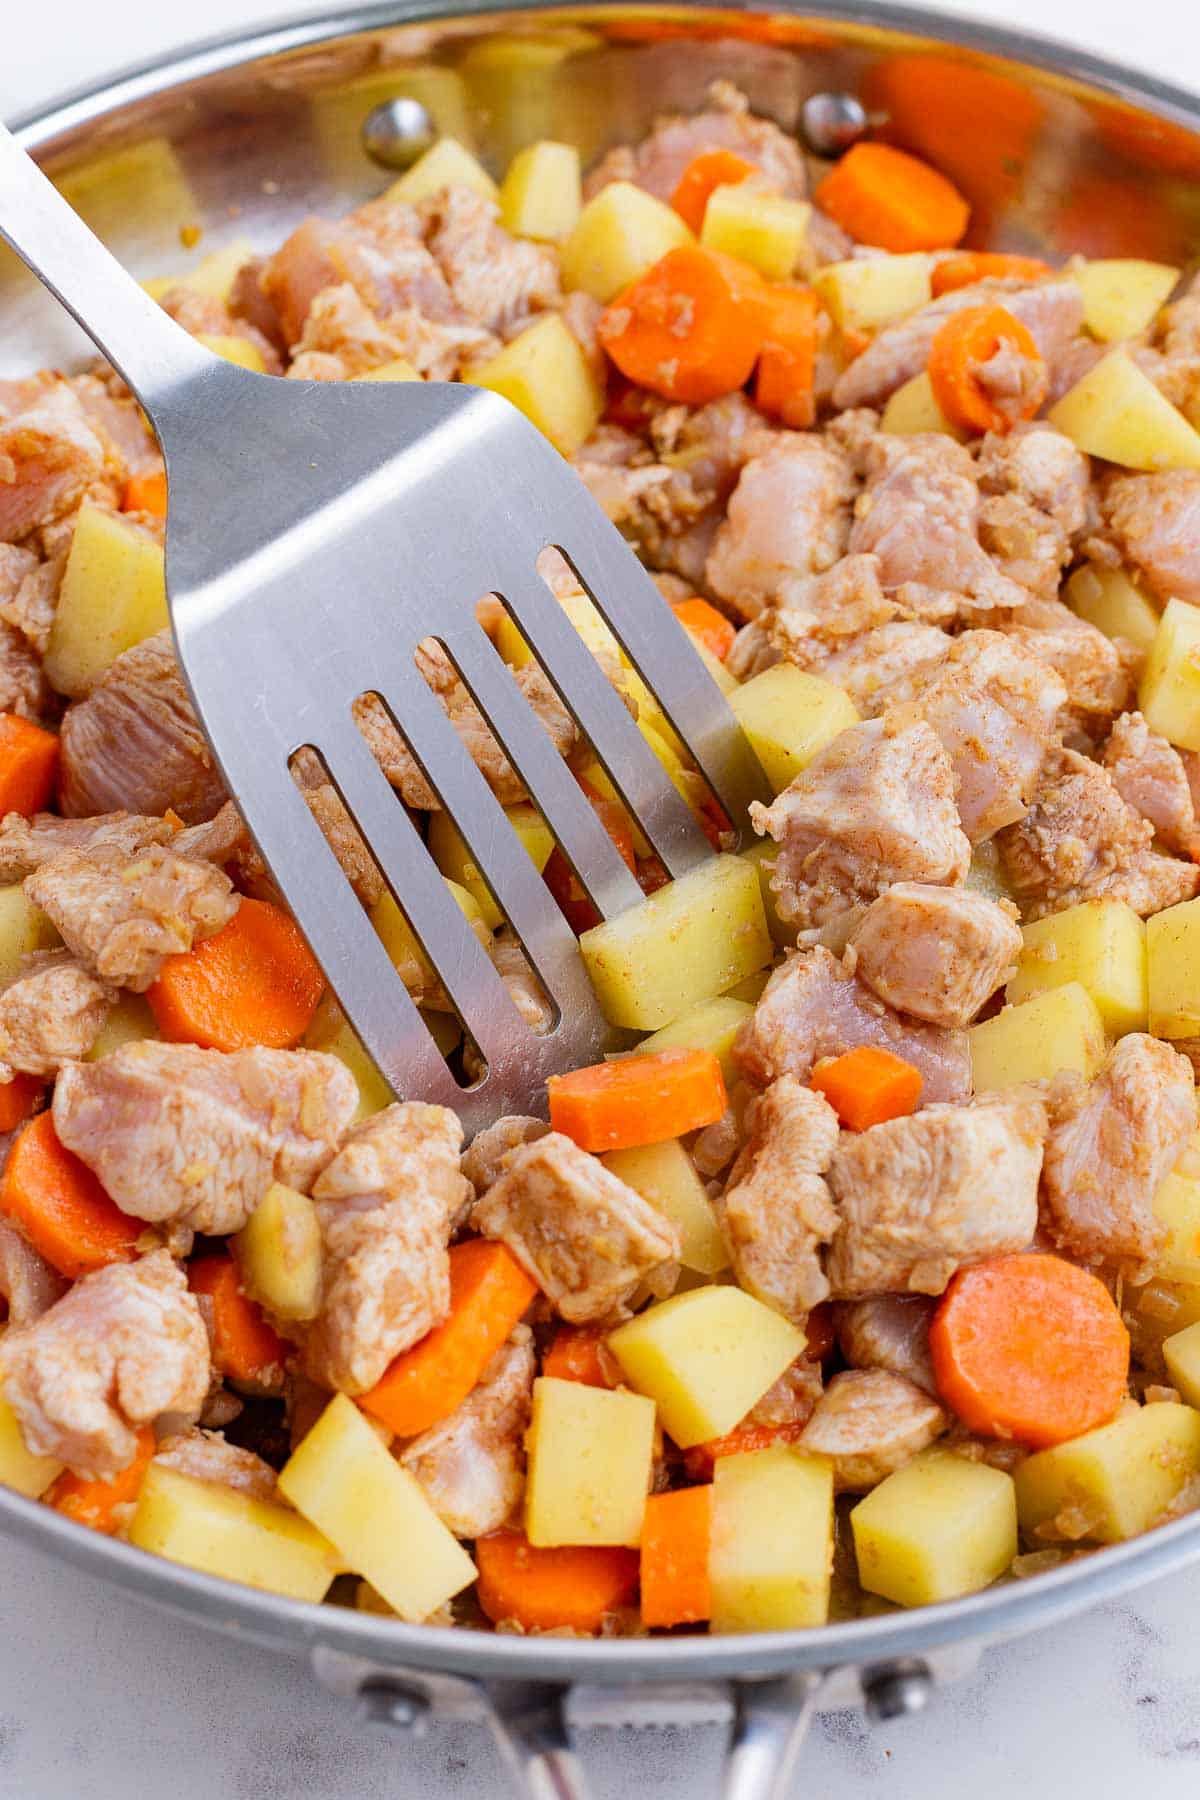 A spatula stirs the chicken, carrots, and potatoes into onions.